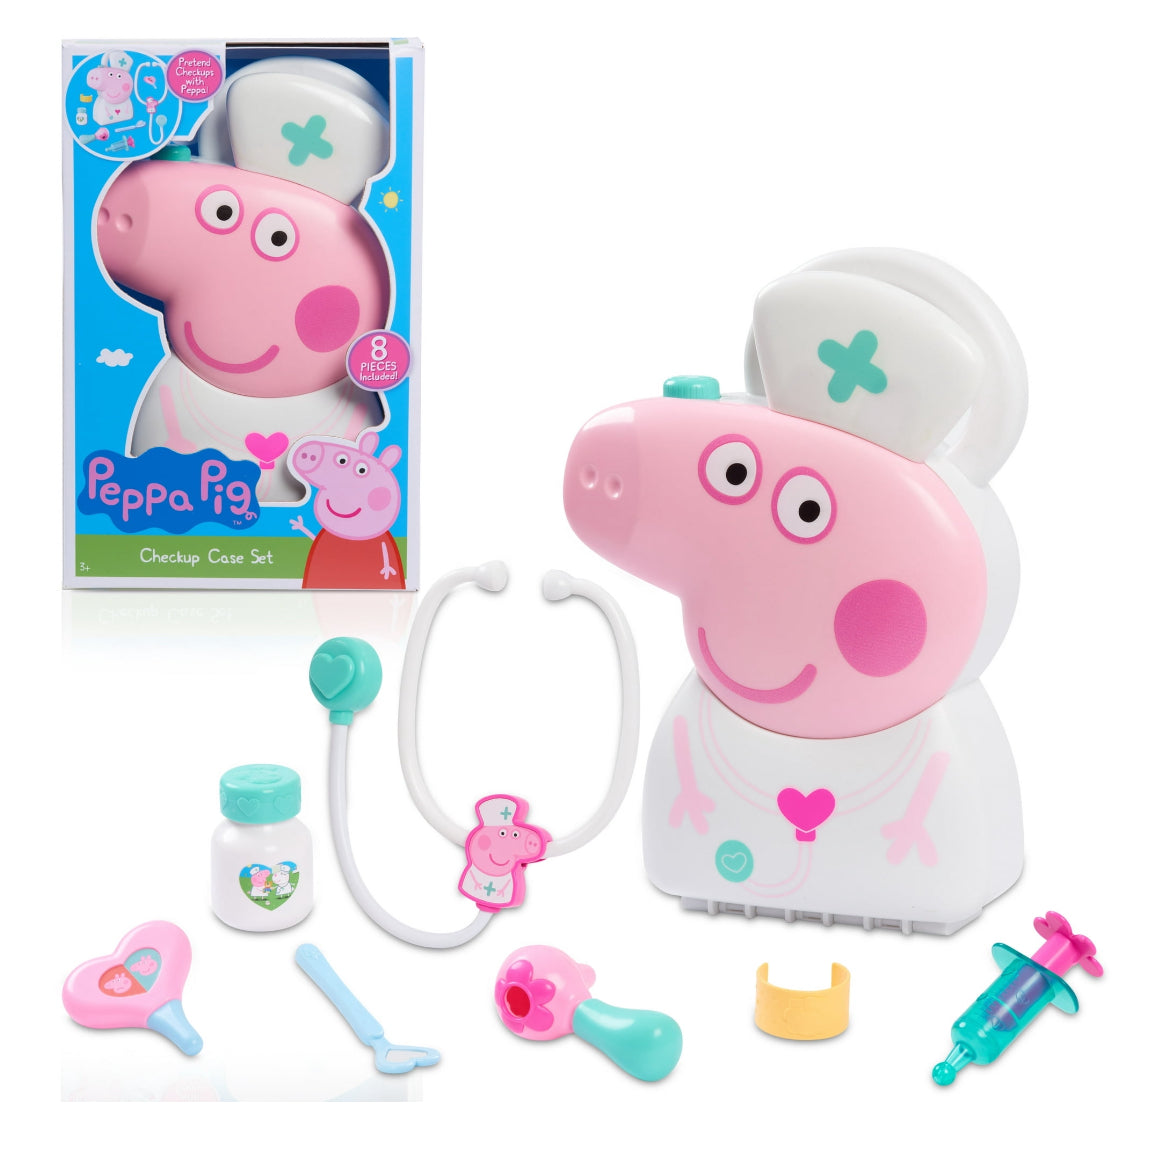 Peppa Pig Checkup Case Set with Carry Handle, 8-Piece Doctor Kit for Kids with Stethoscope